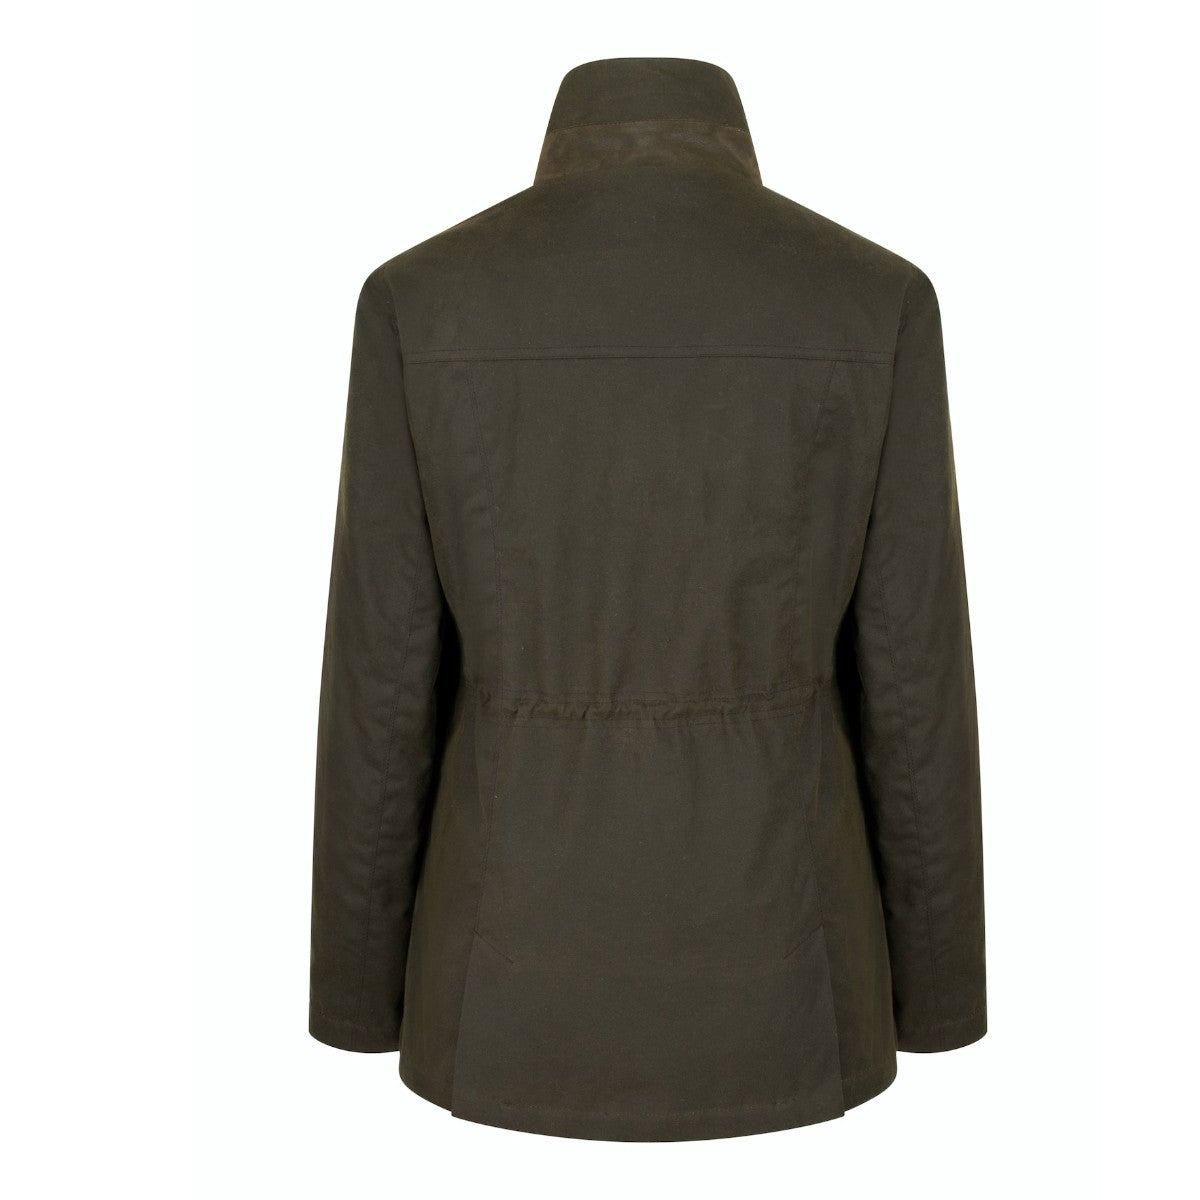 Hoggs of Fife Caledonia Ladies Waxed Jacket | Cluny Country 